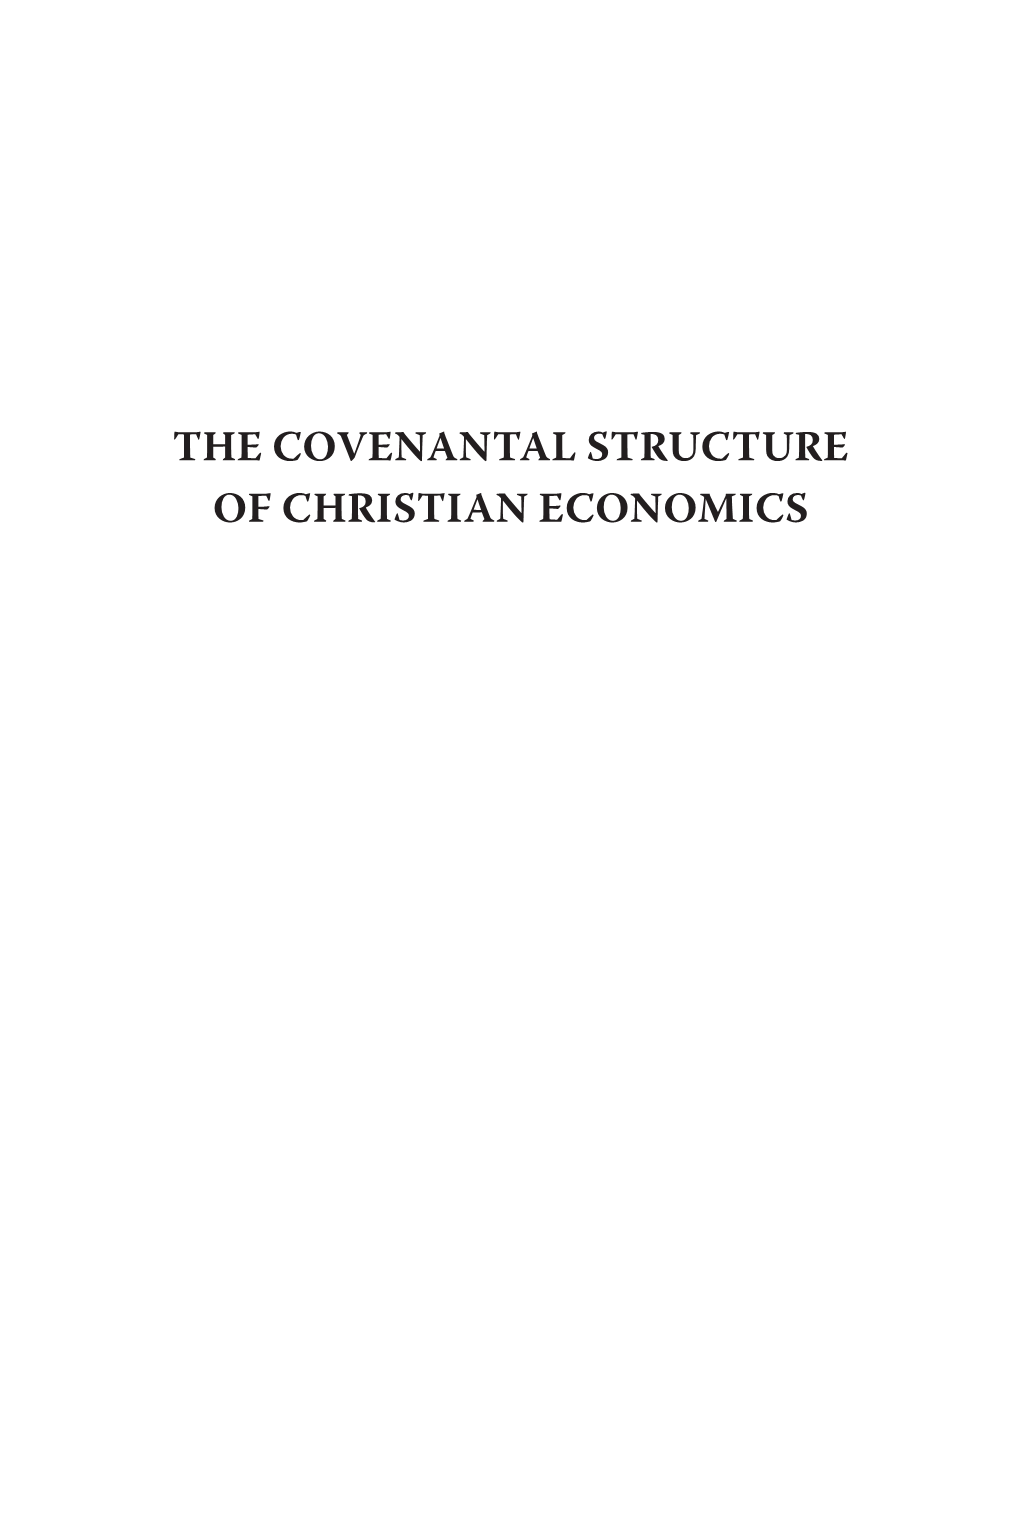 The Covenantal Structure of Christian Economics